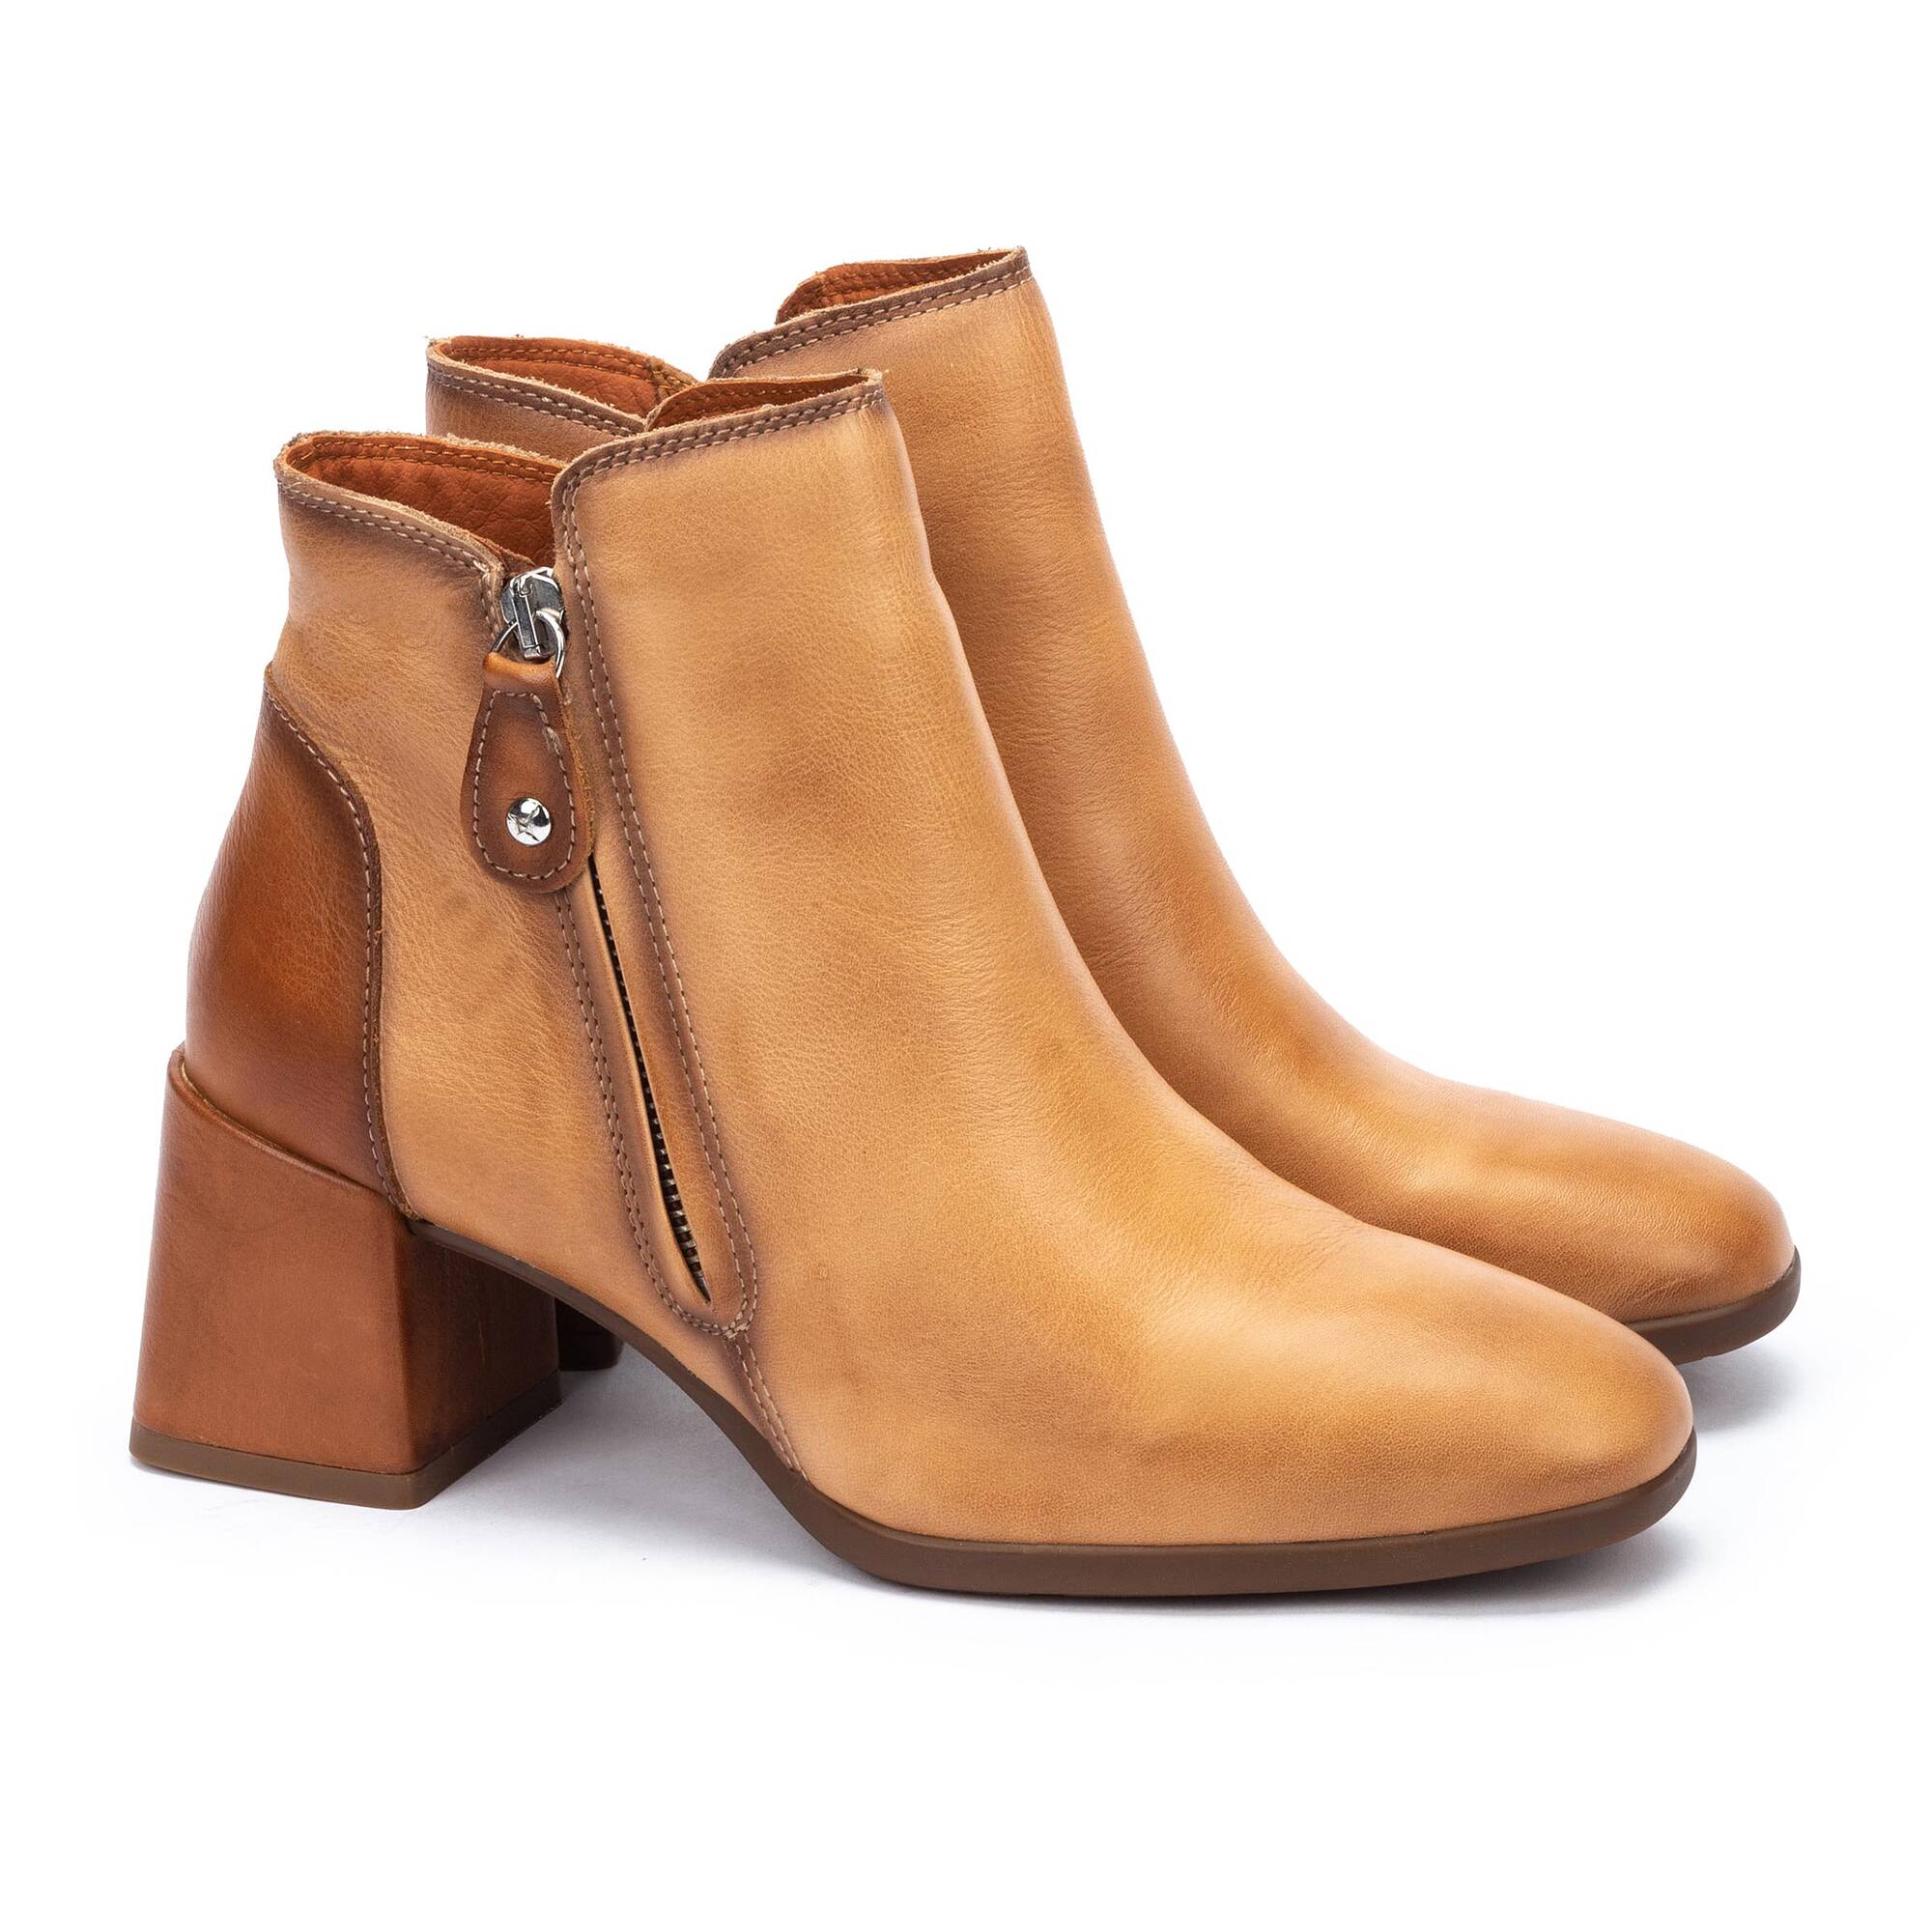 Ankle boots | SEVILLA W1W-8816C1, ALMOND, large image number 20 | null